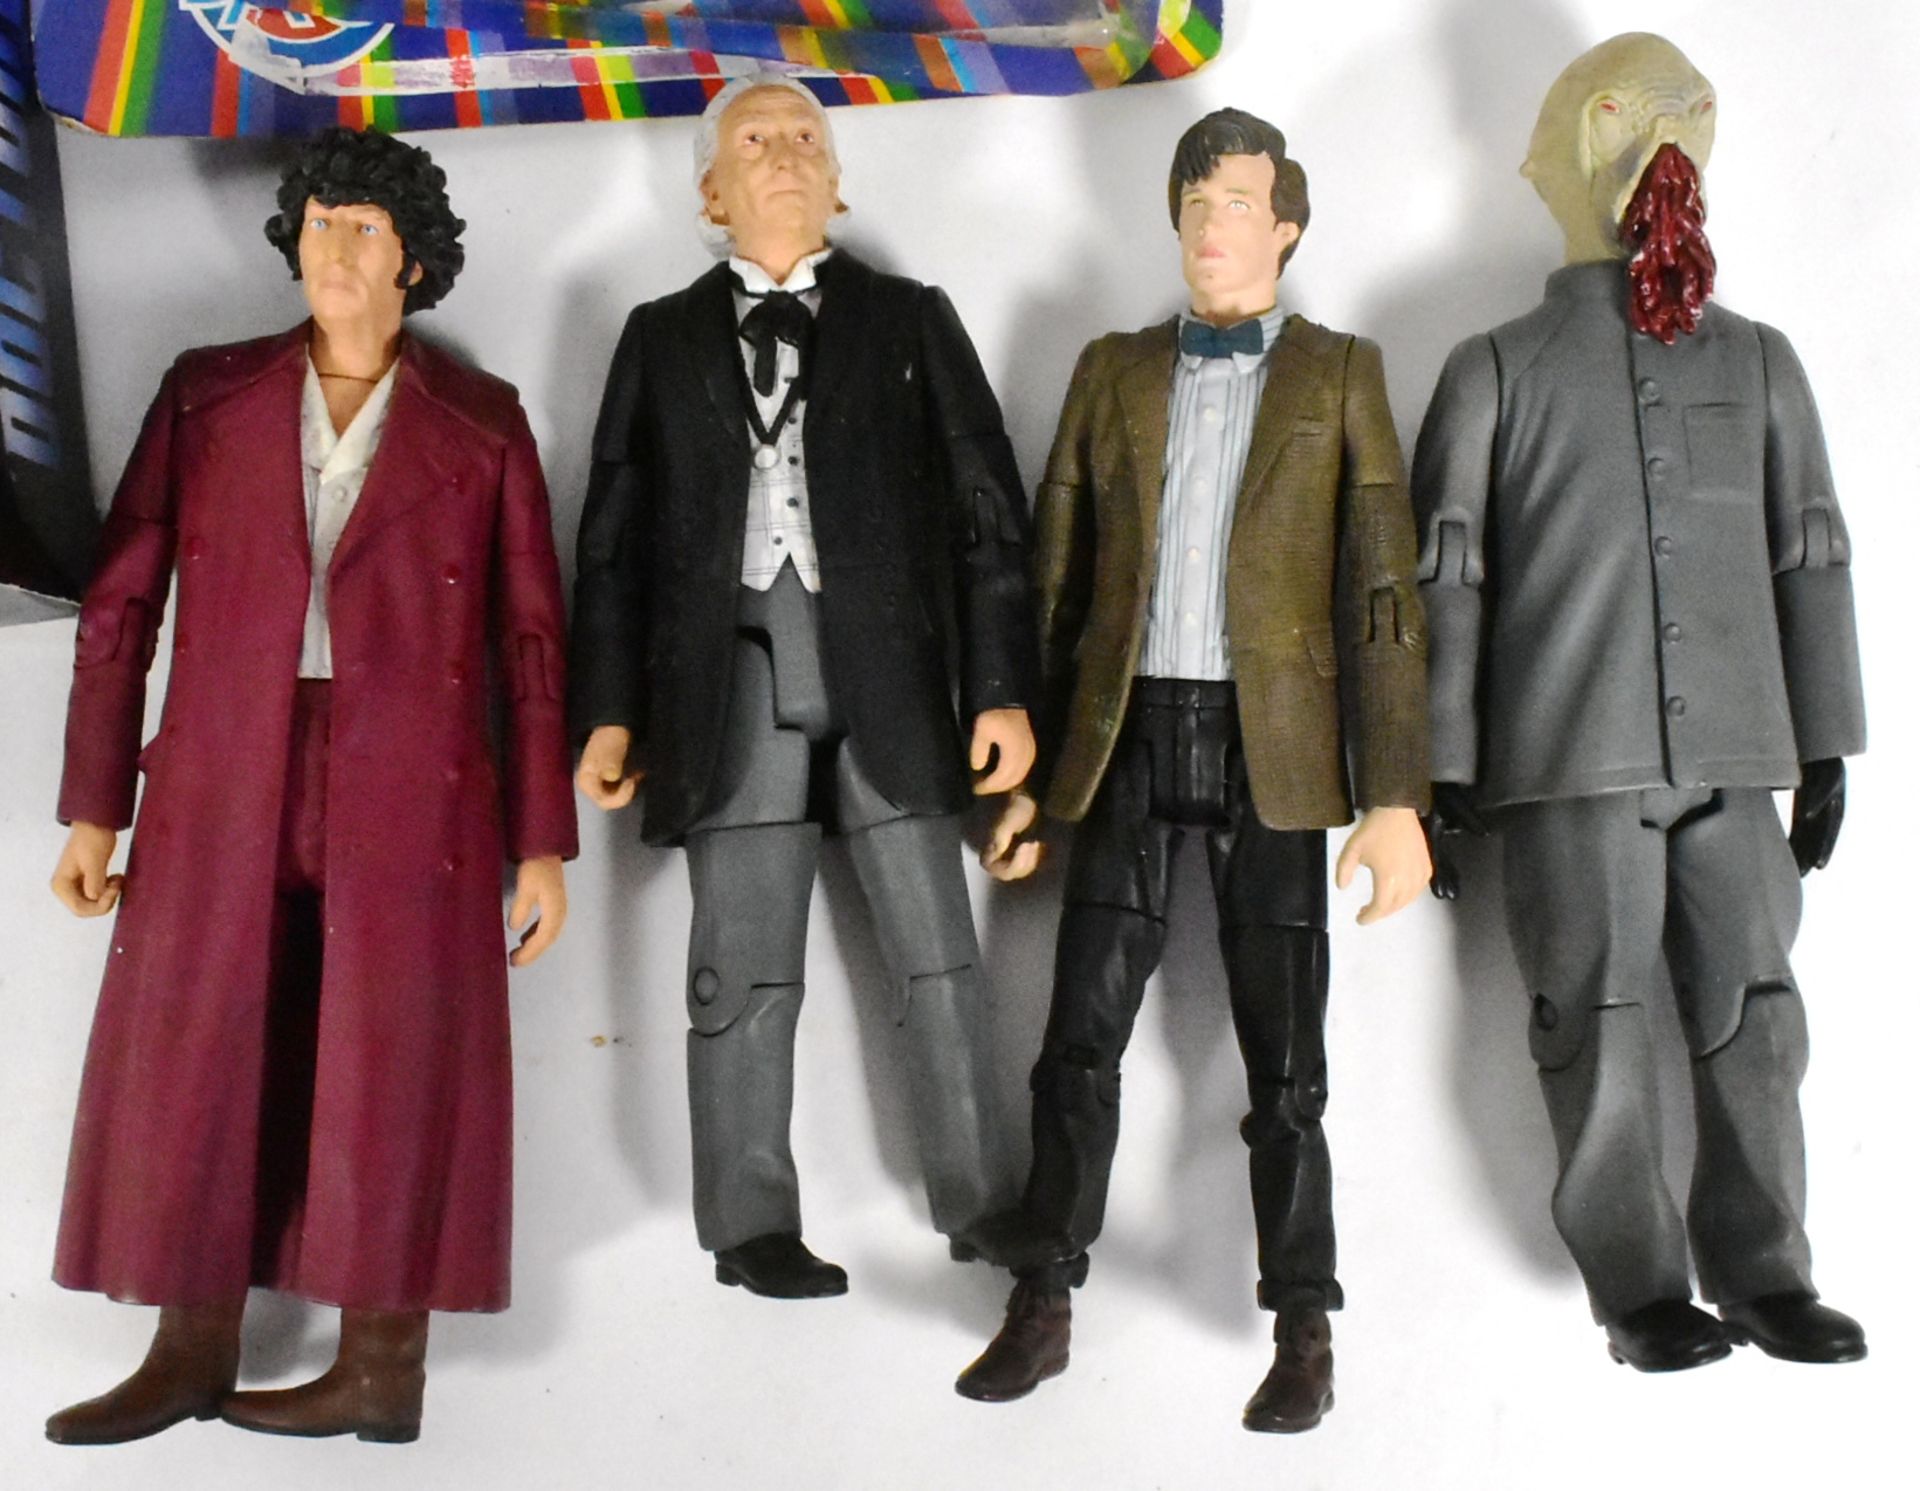 DOCTOR WHO - COLLECTION OF ASSORTED ACTION FIGURES - Image 6 of 6